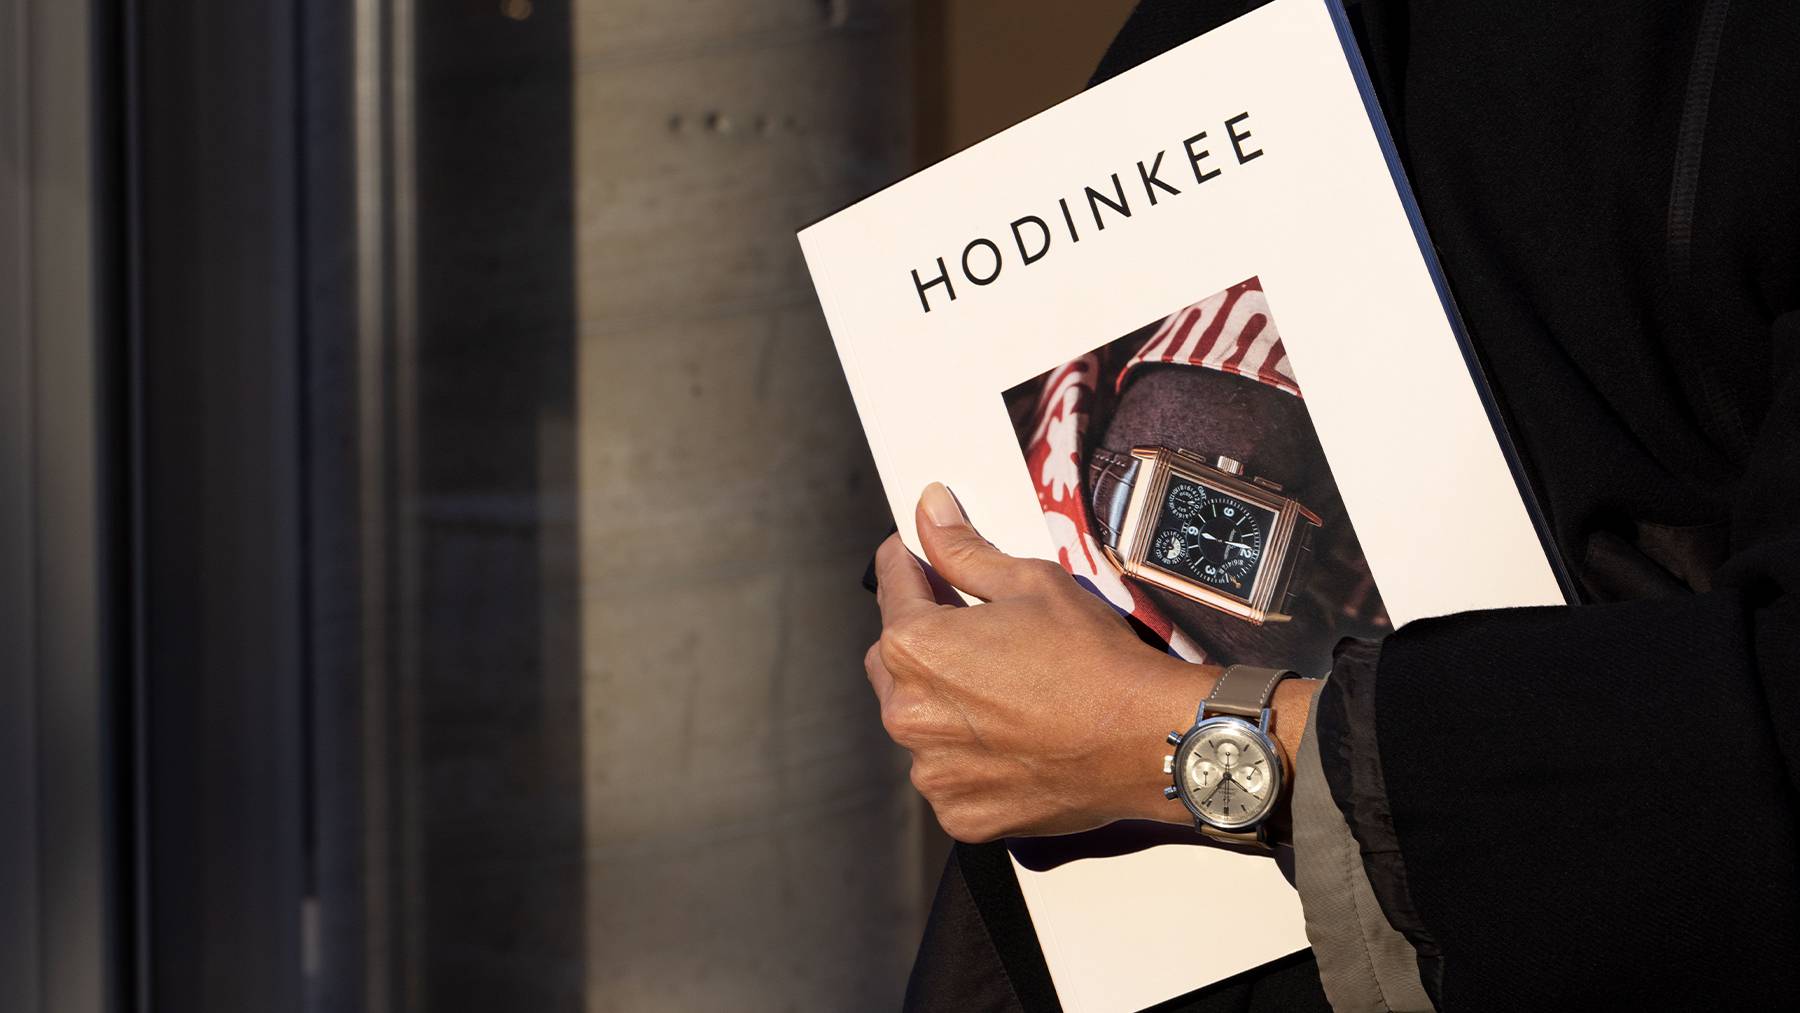 Hodinkee started out as a blog for watch enthusiasts and grew to become a content-and-commerce empire.